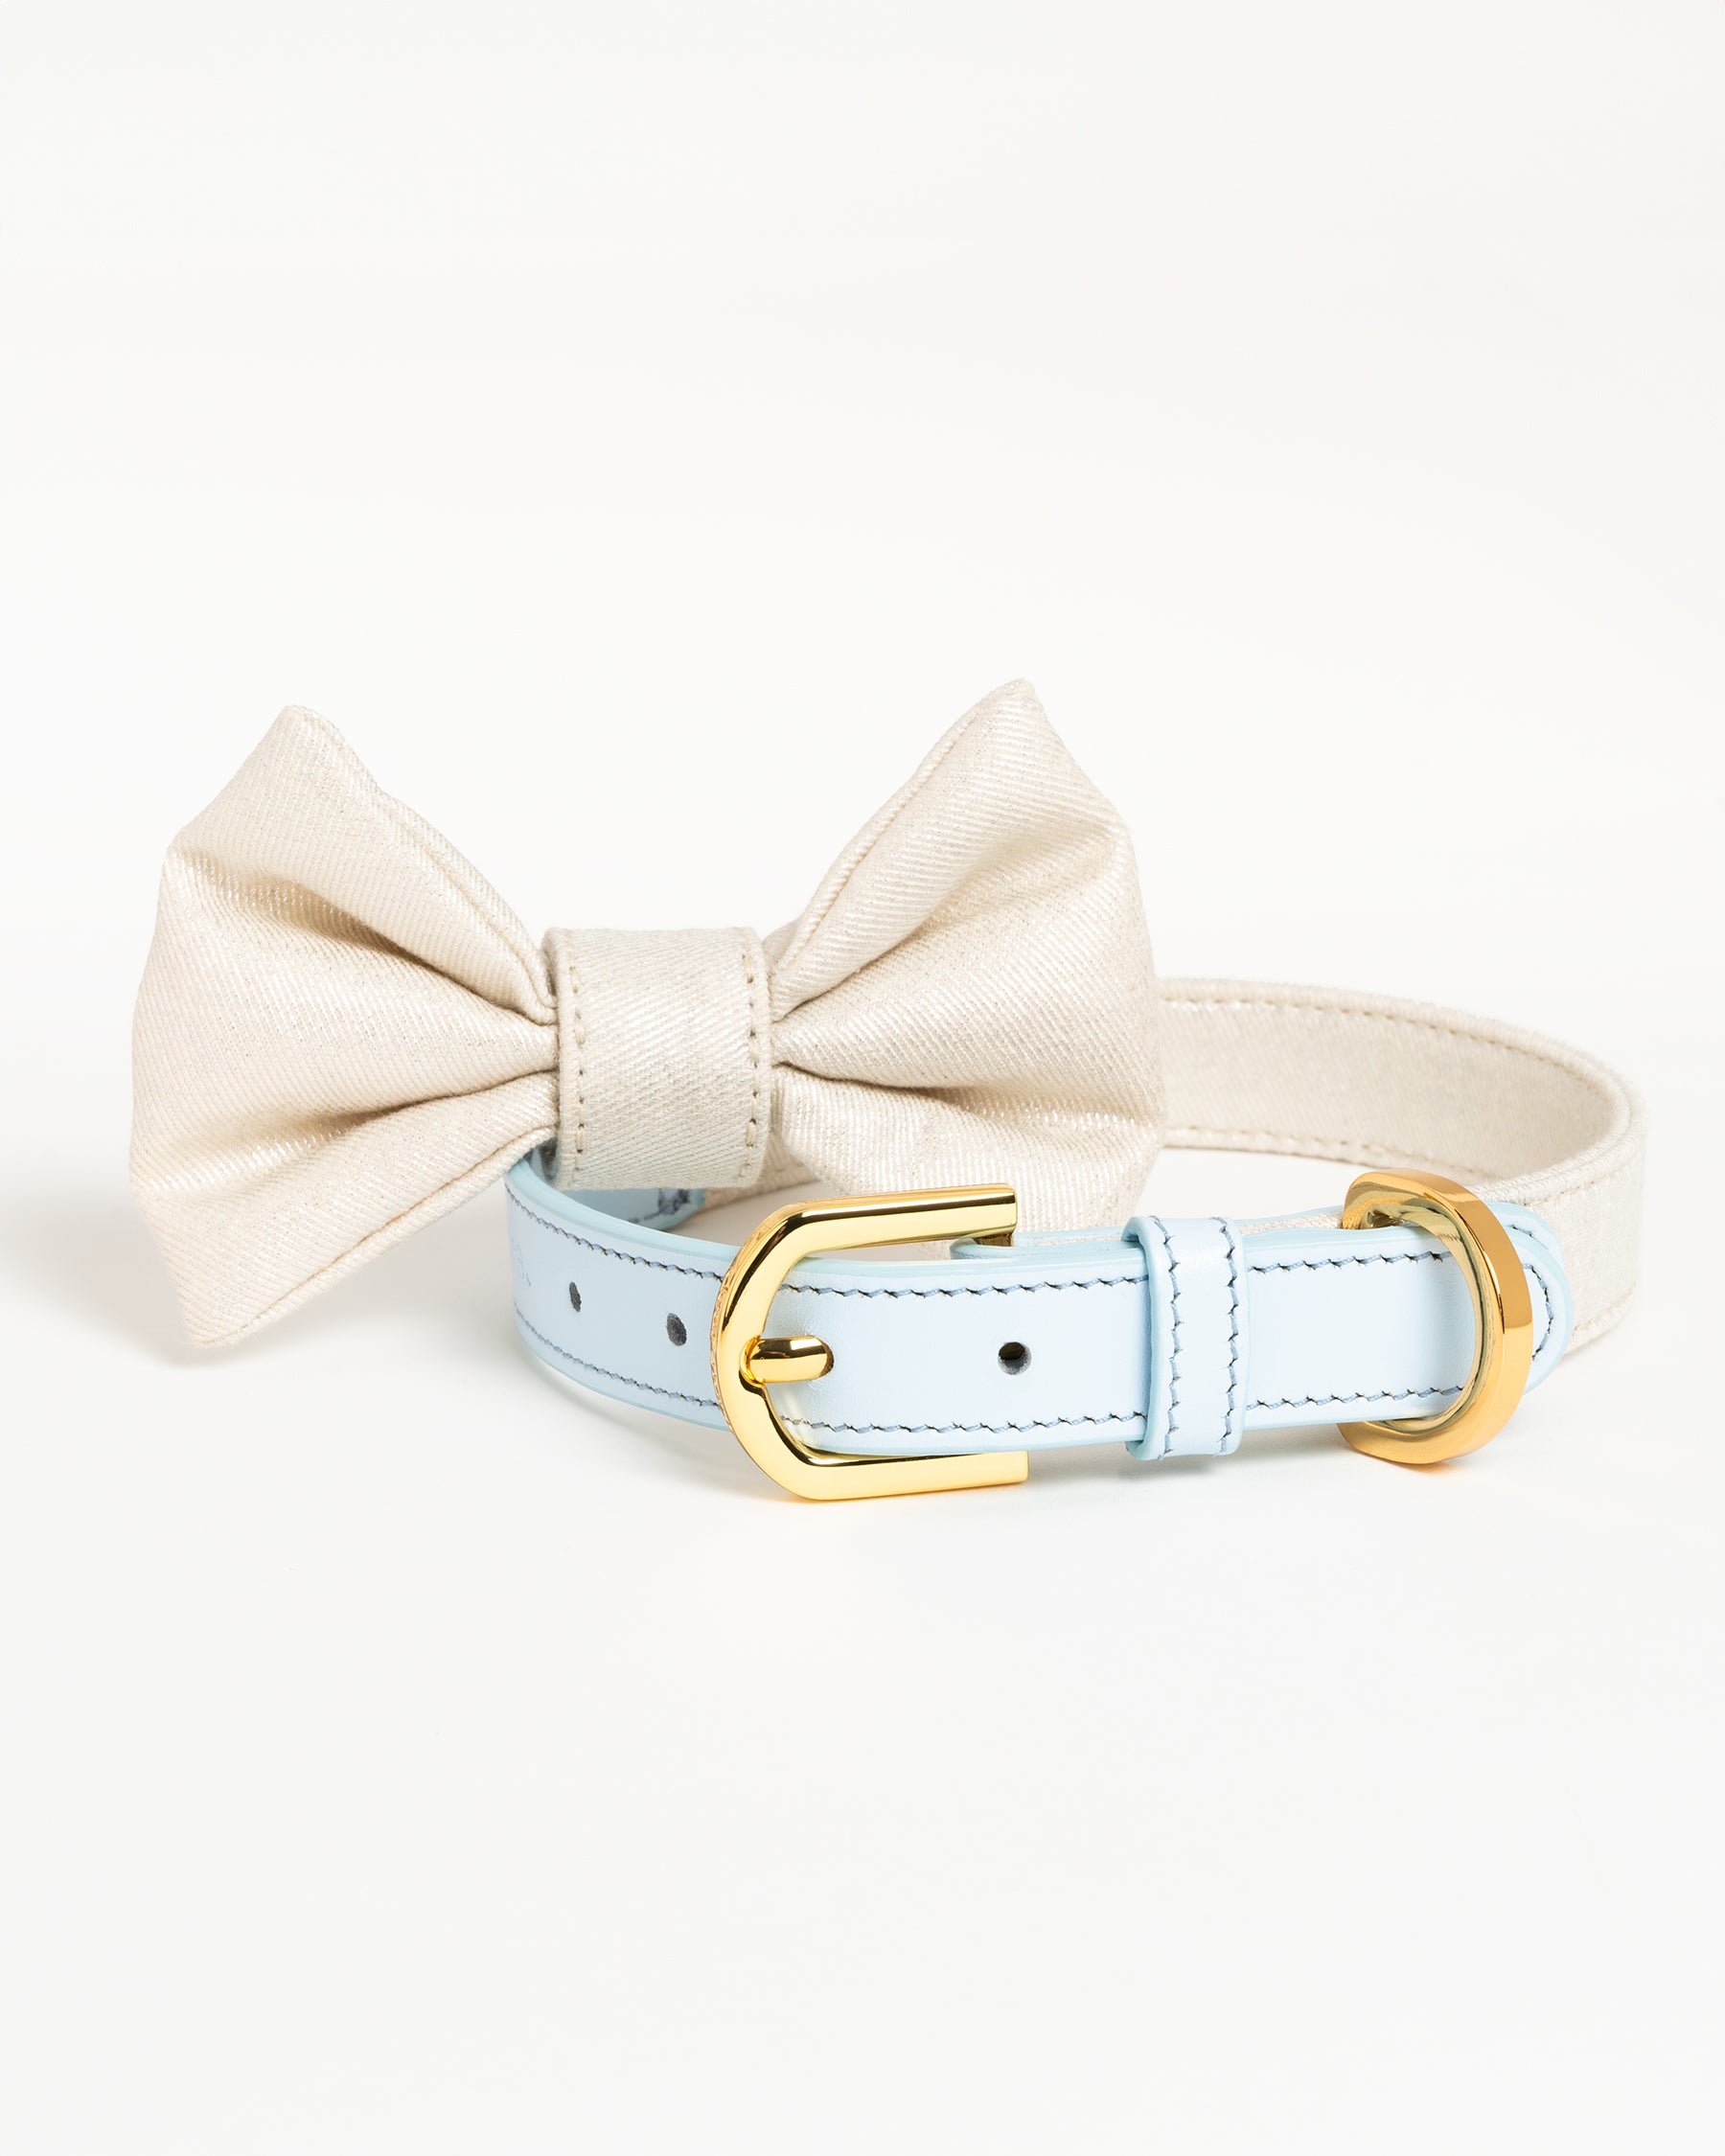 Dear Nora Sapphire dog collar and bow - baby blue leather, cream sparkle fabric and 24k plated hardware - front shot